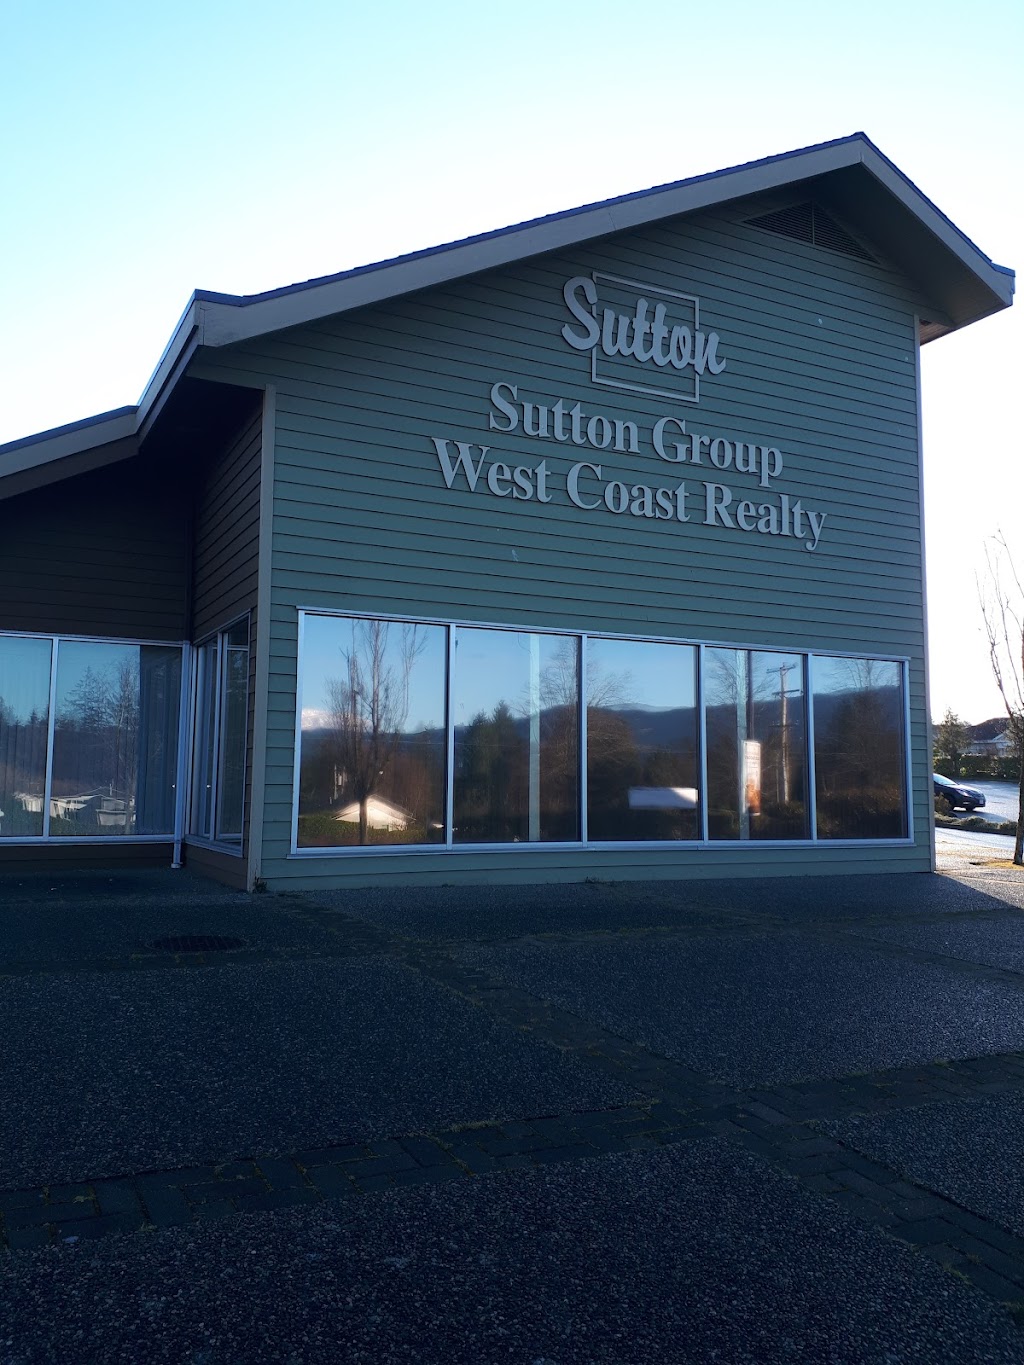 Sutton Group - West Coast Realty | 5800 Turner Rd, Nanaimo, BC V9T 6J4, Canada | Phone: (250) 756-2112